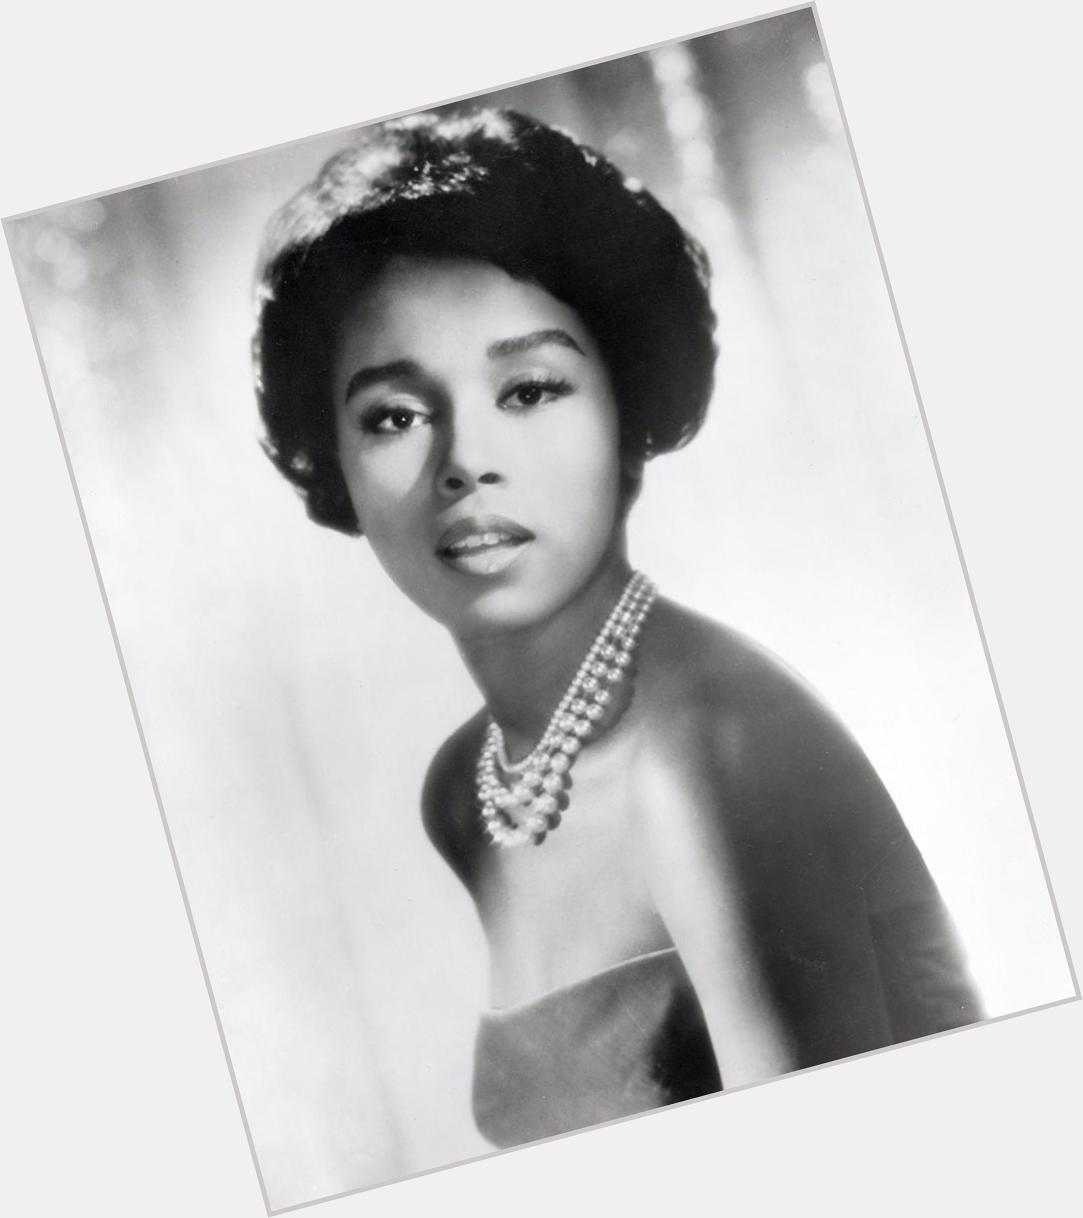 Happy Birthday 80th to the legendary Ms. Diahann Carroll. A beauty who carries herself with class and grace.  